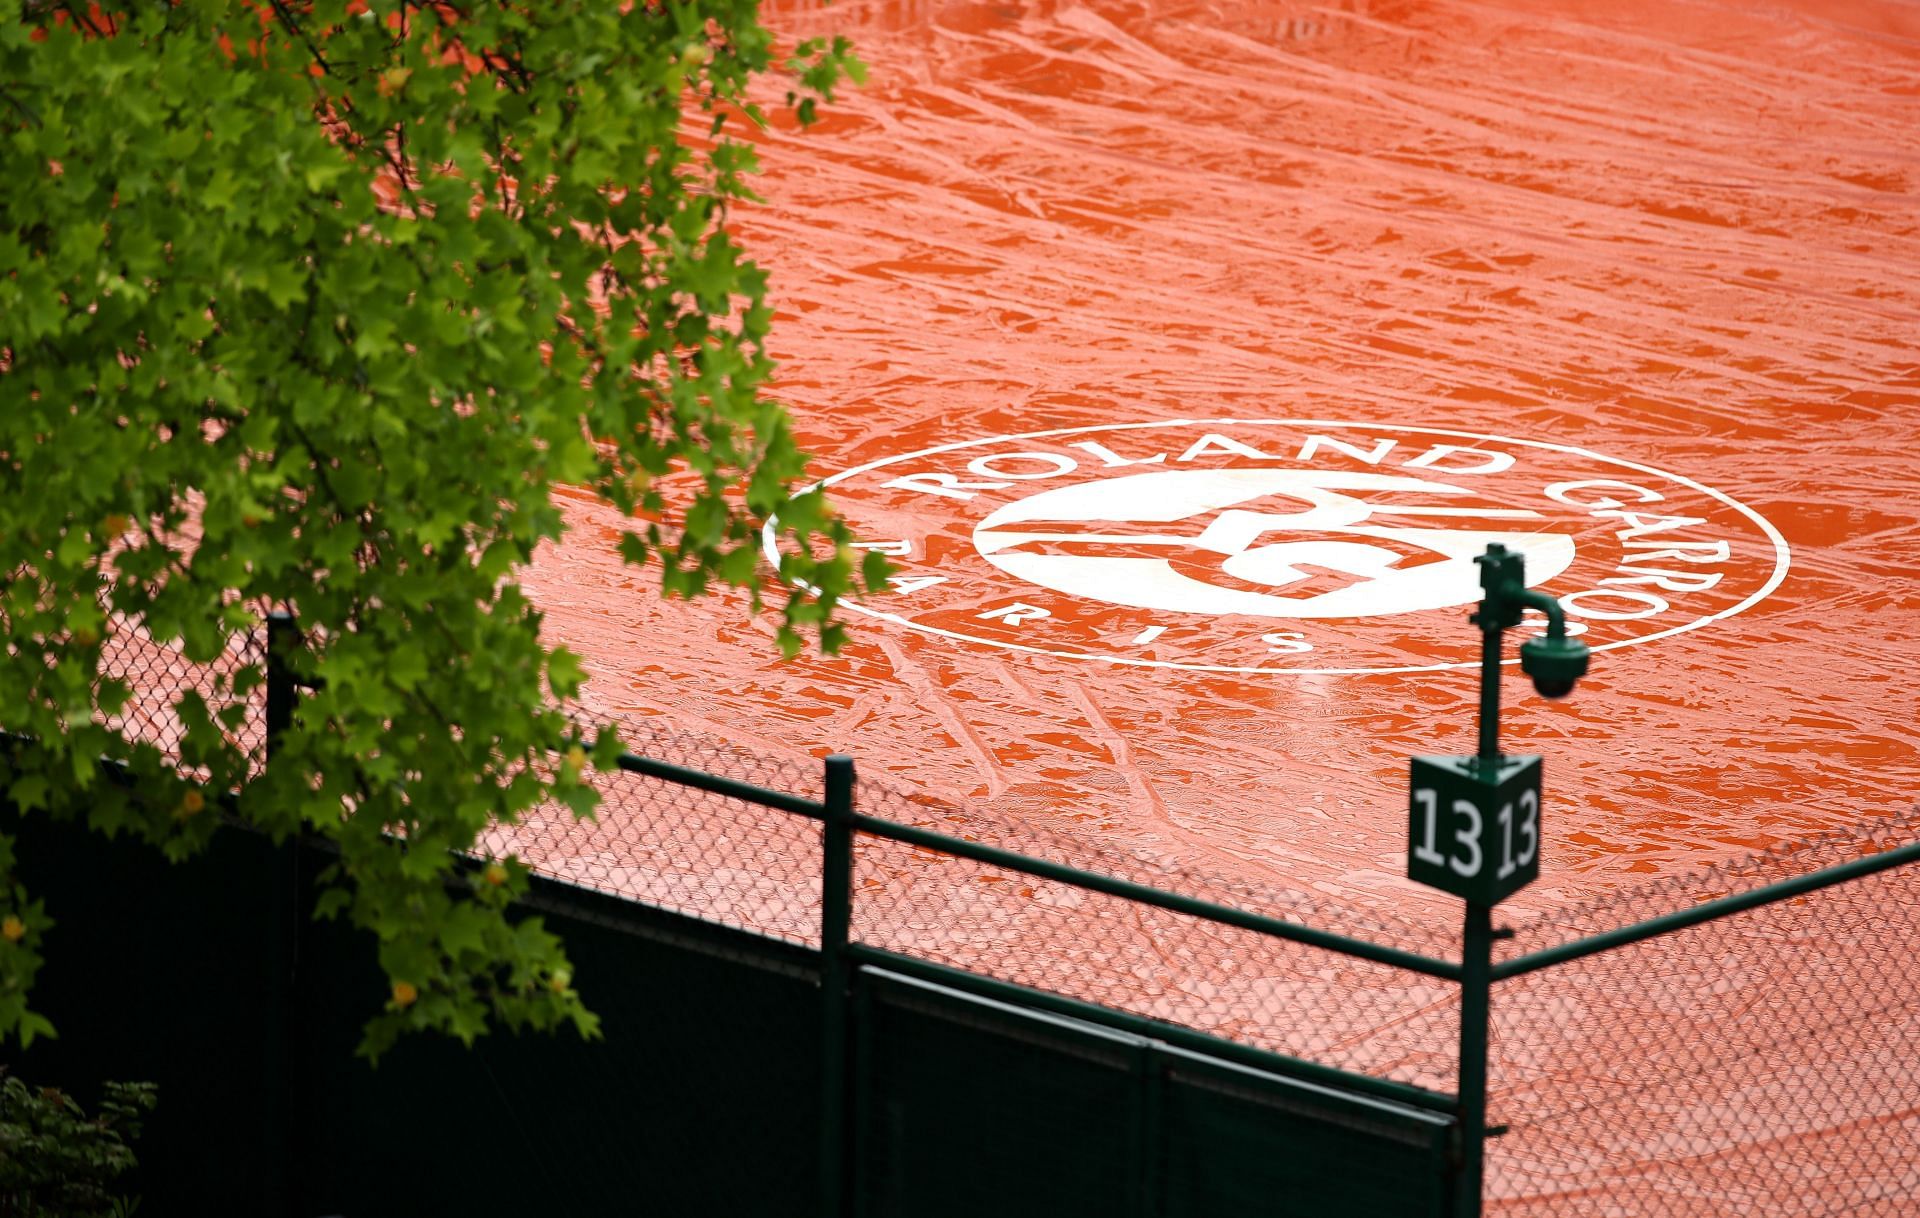 Roland Garros will commence on May 22